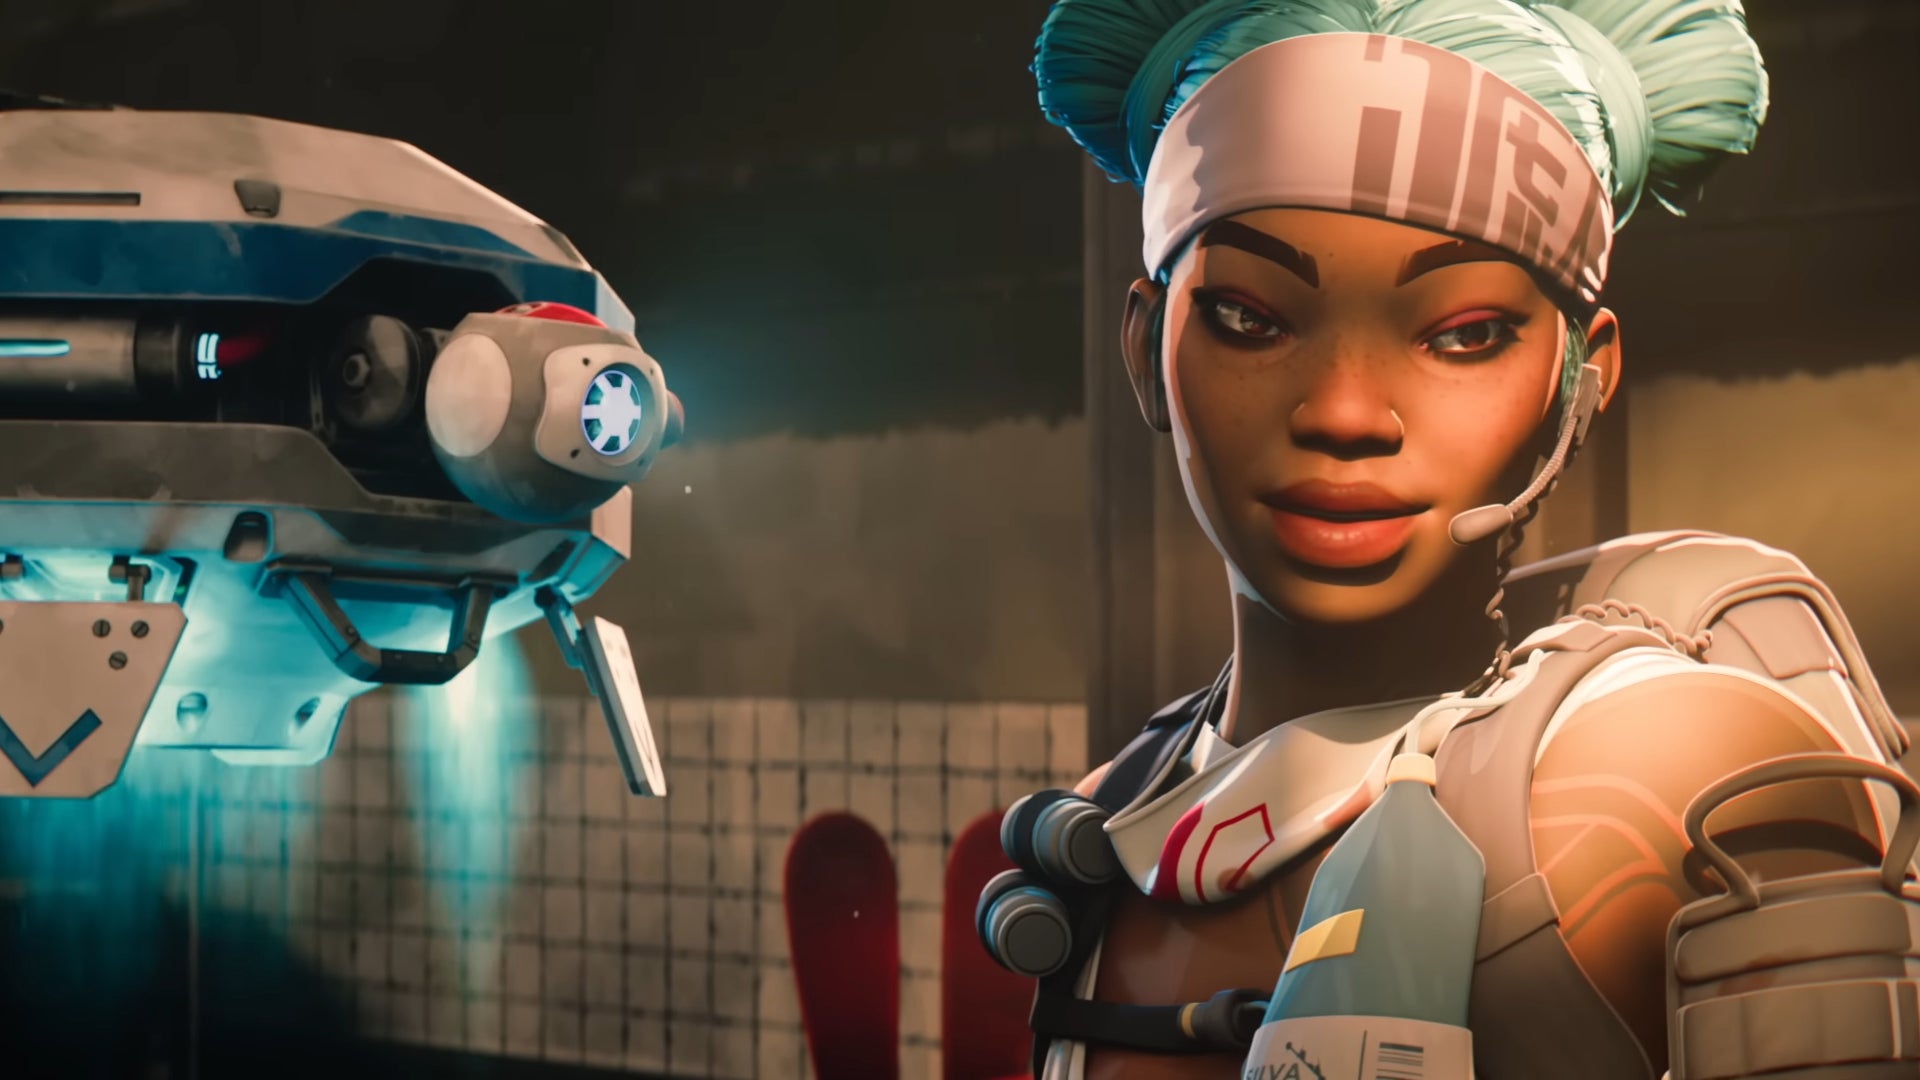 Lifeline looks down at a patient next to her Drone Of Compassion in Apex Legends.